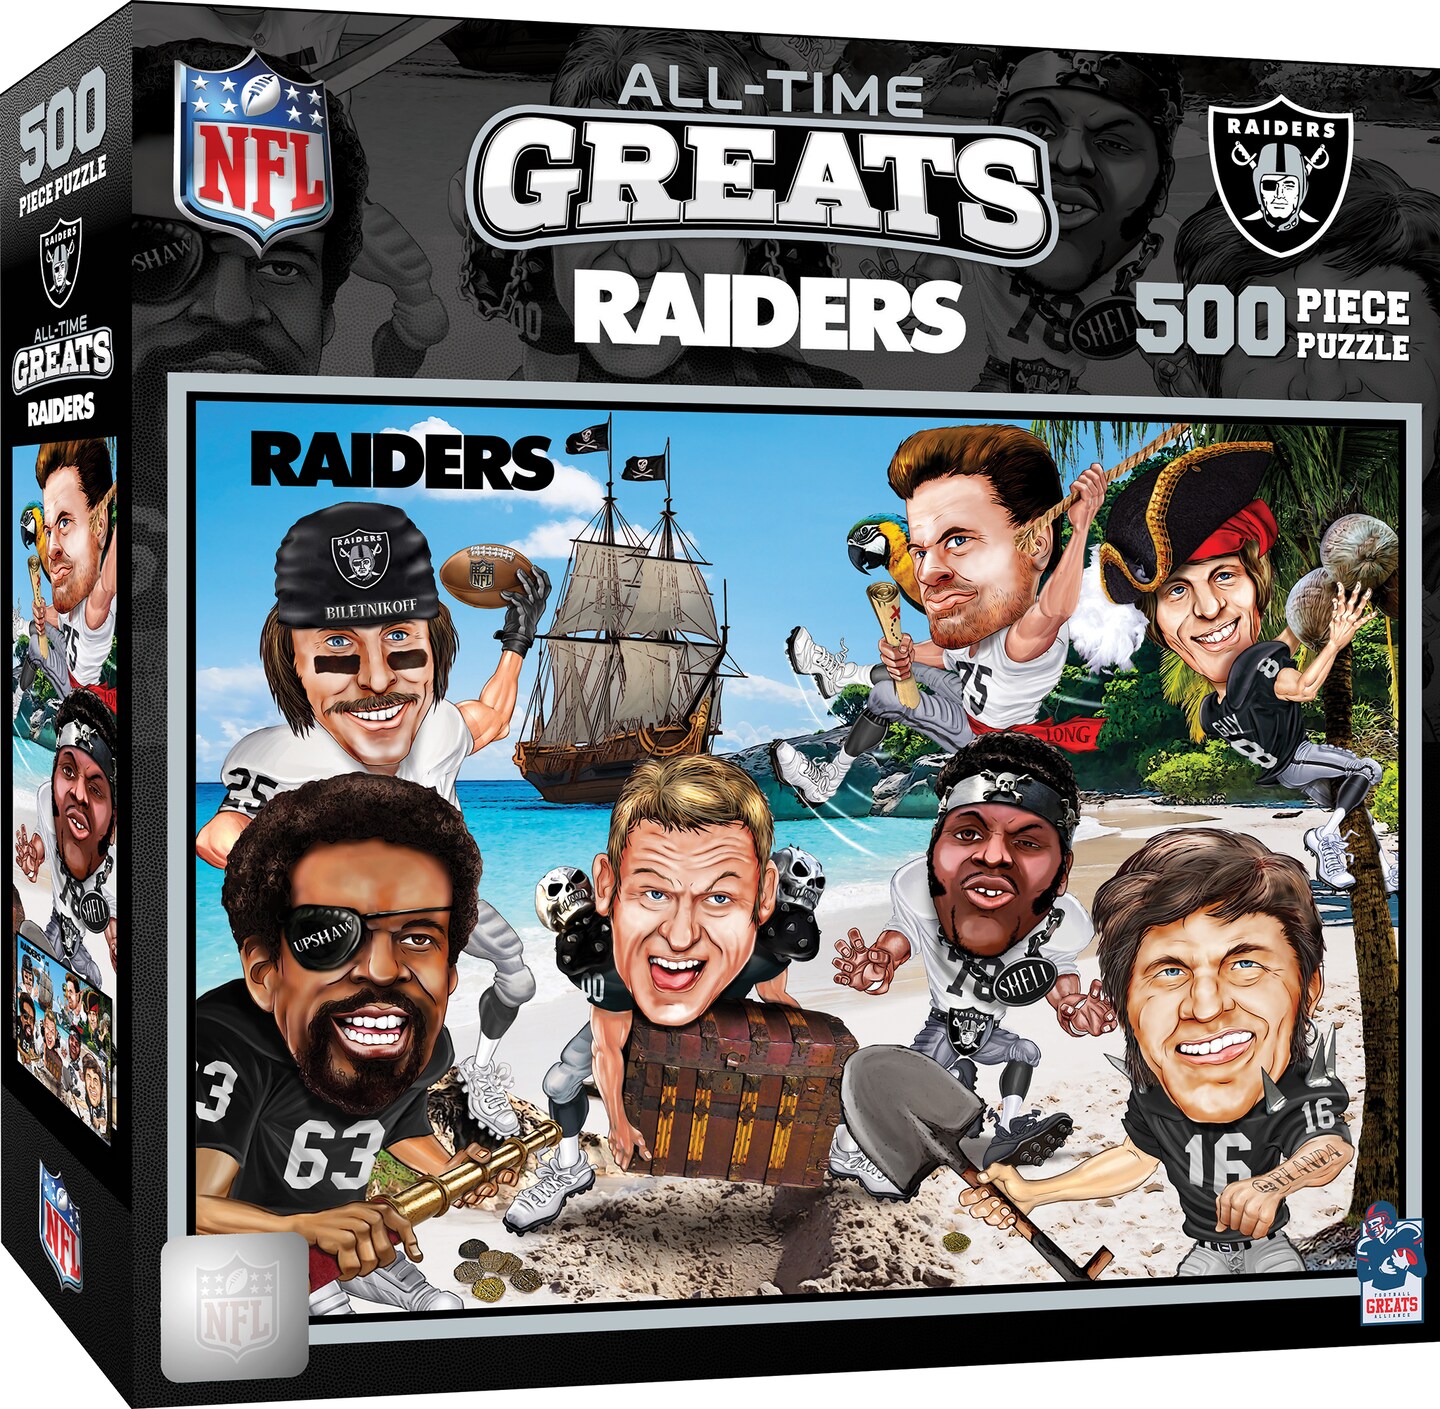 MasterPieces 500 Piece Sports Jigsaw Puzzle for Adults - NFL Las Vegas  Raiders All-Time Greats - 15x21